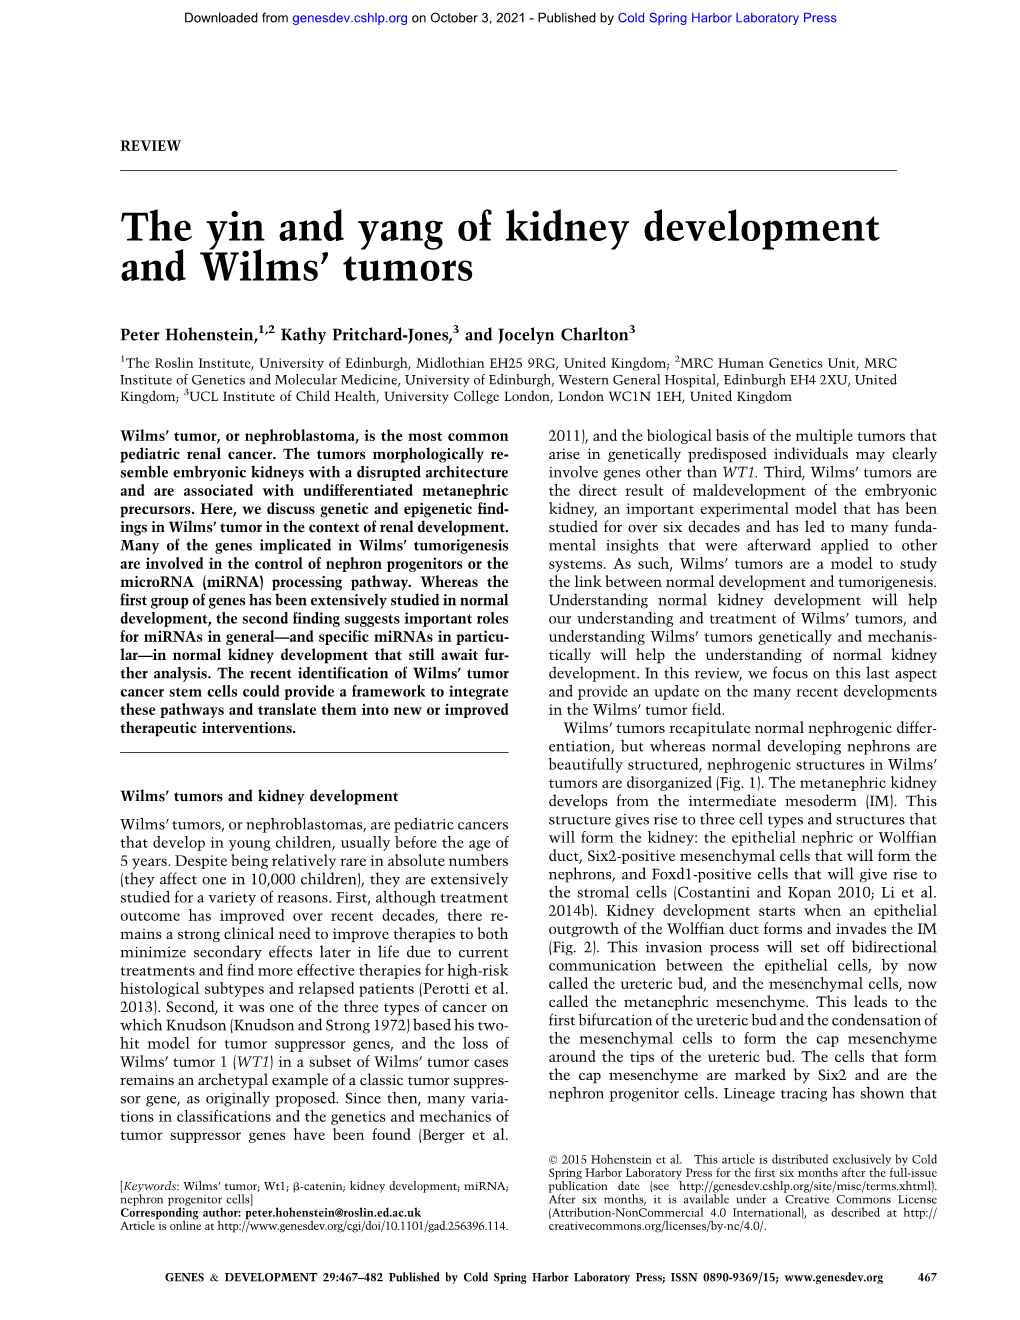 The Yin and Yang of Kidney Development and Wilms' Tumors